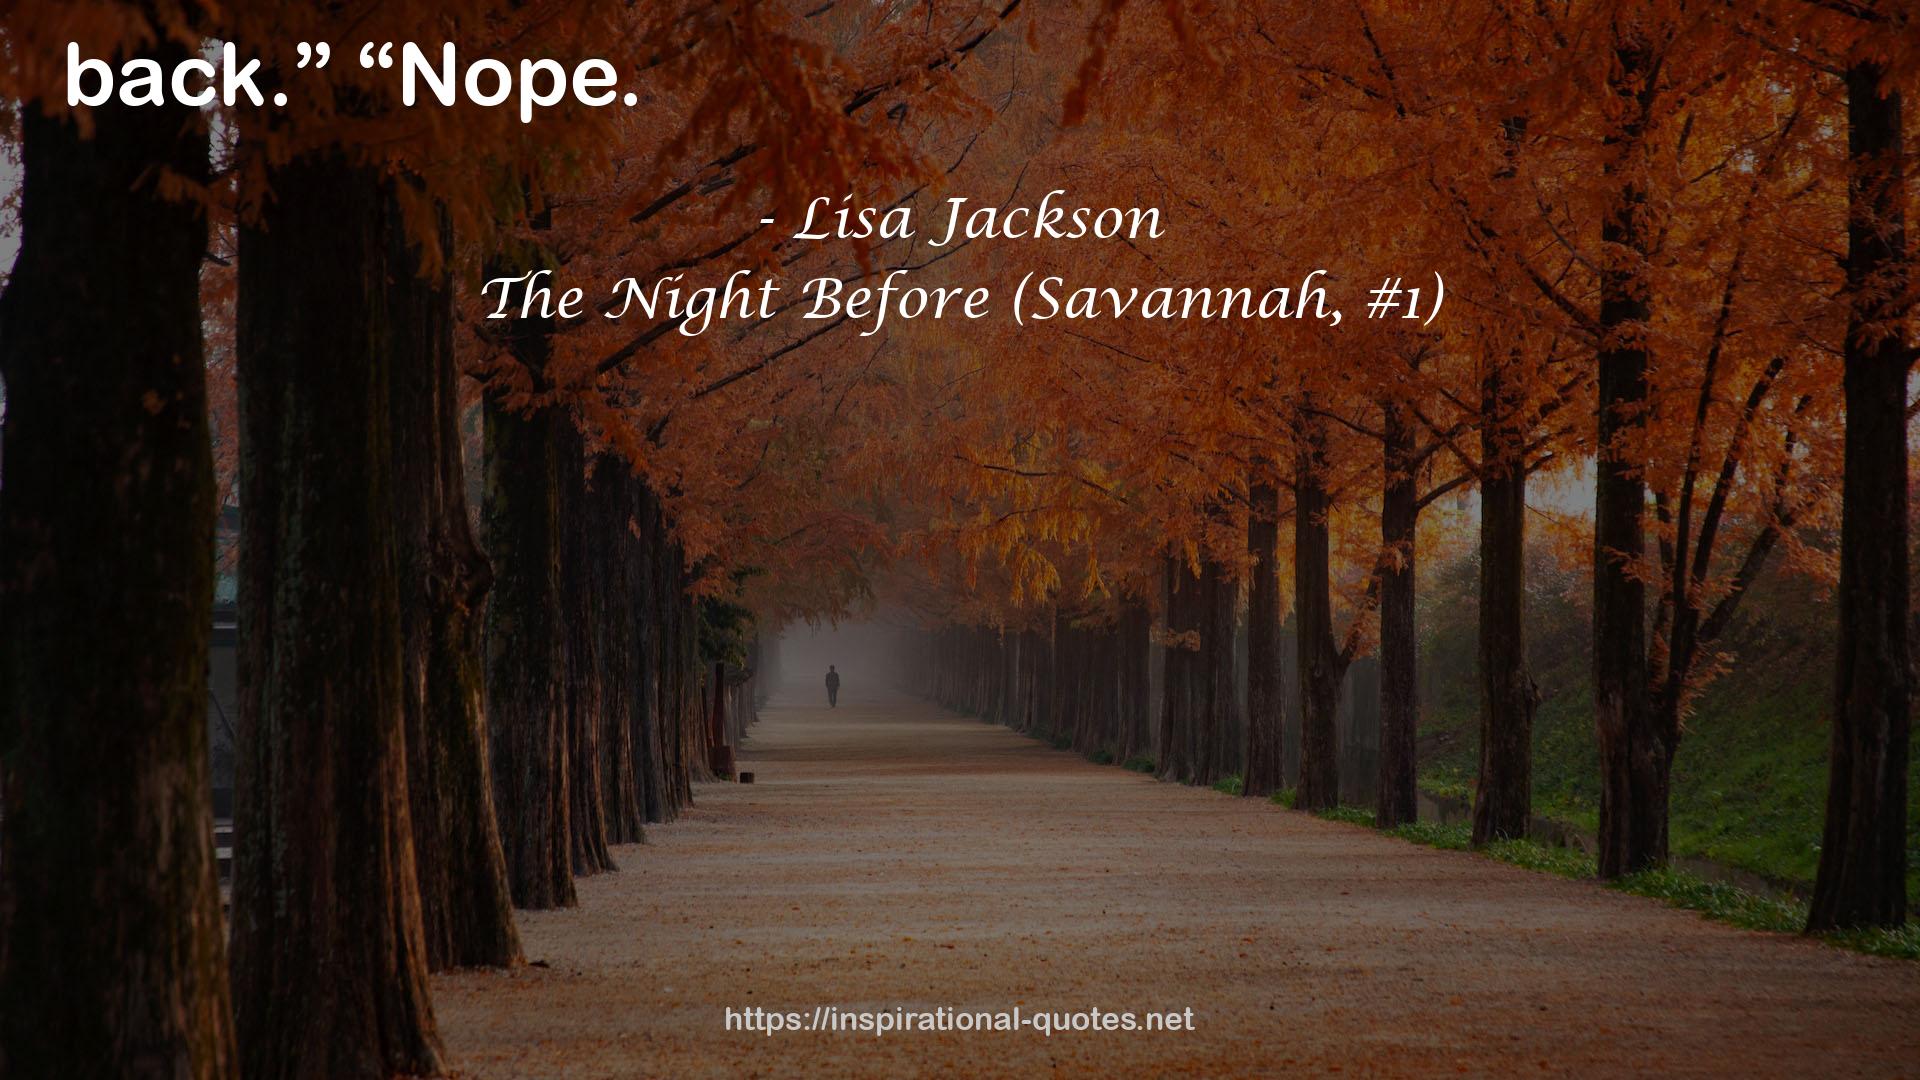 The Night Before (Savannah, #1) QUOTES